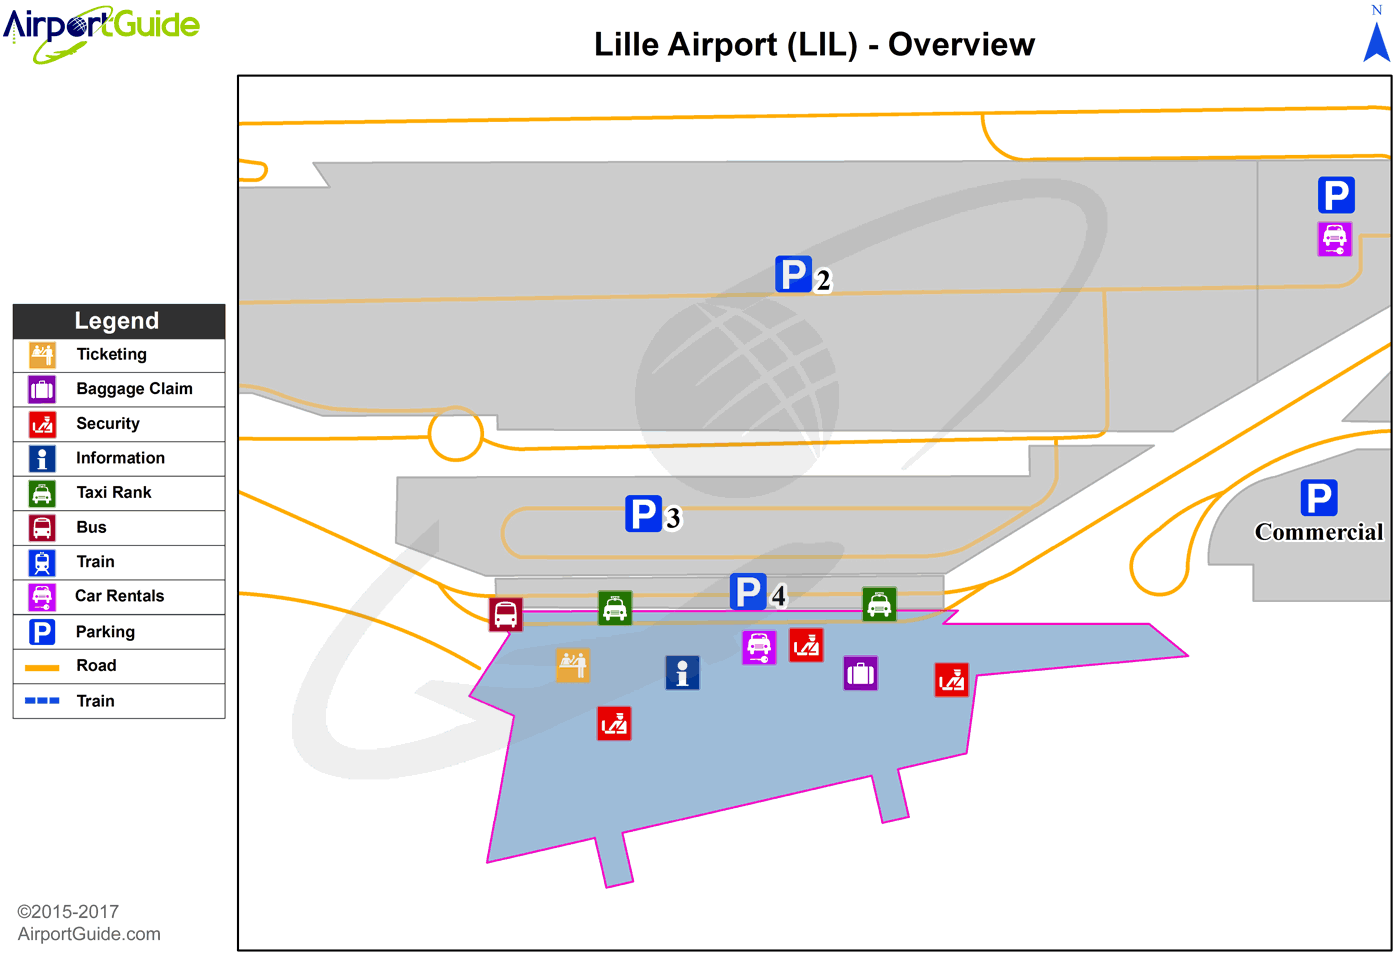 Lille/Lesquin - Rotterdam (LIL) Airport Terminal Map - Overview